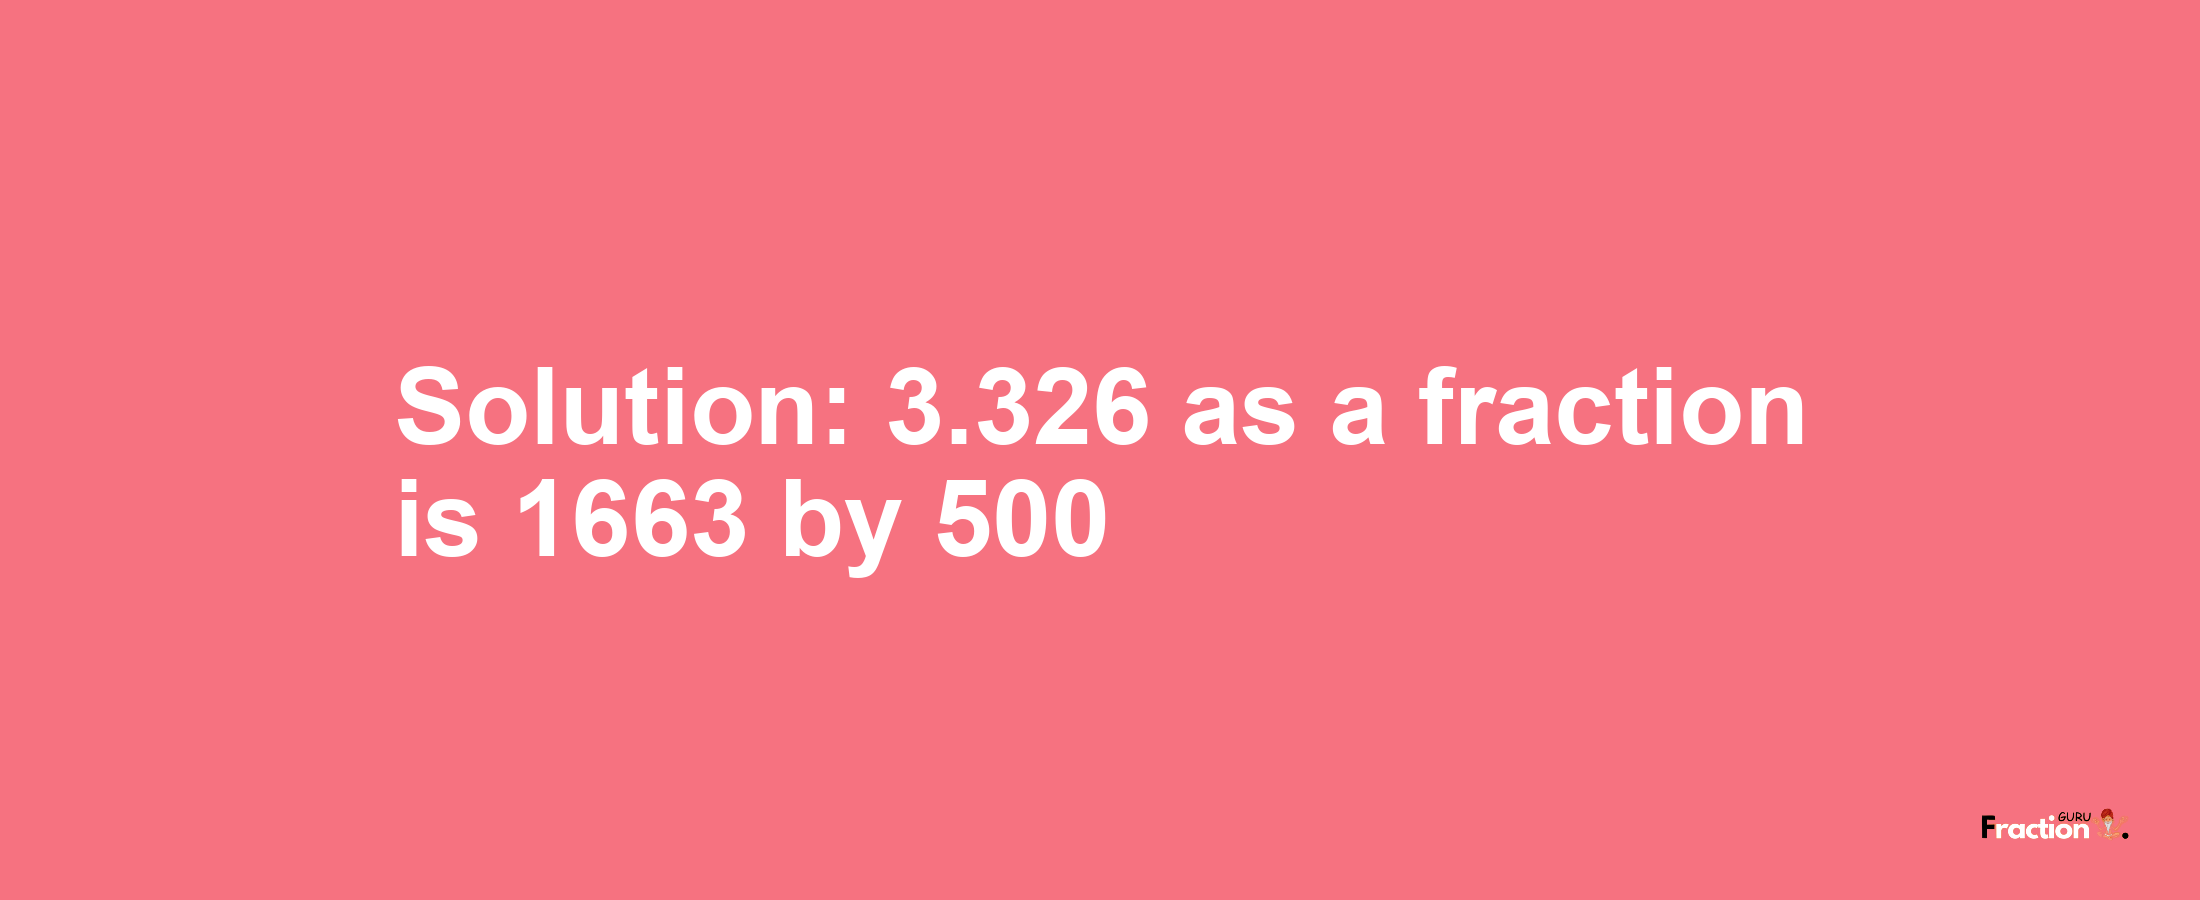 Solution:3.326 as a fraction is 1663/500